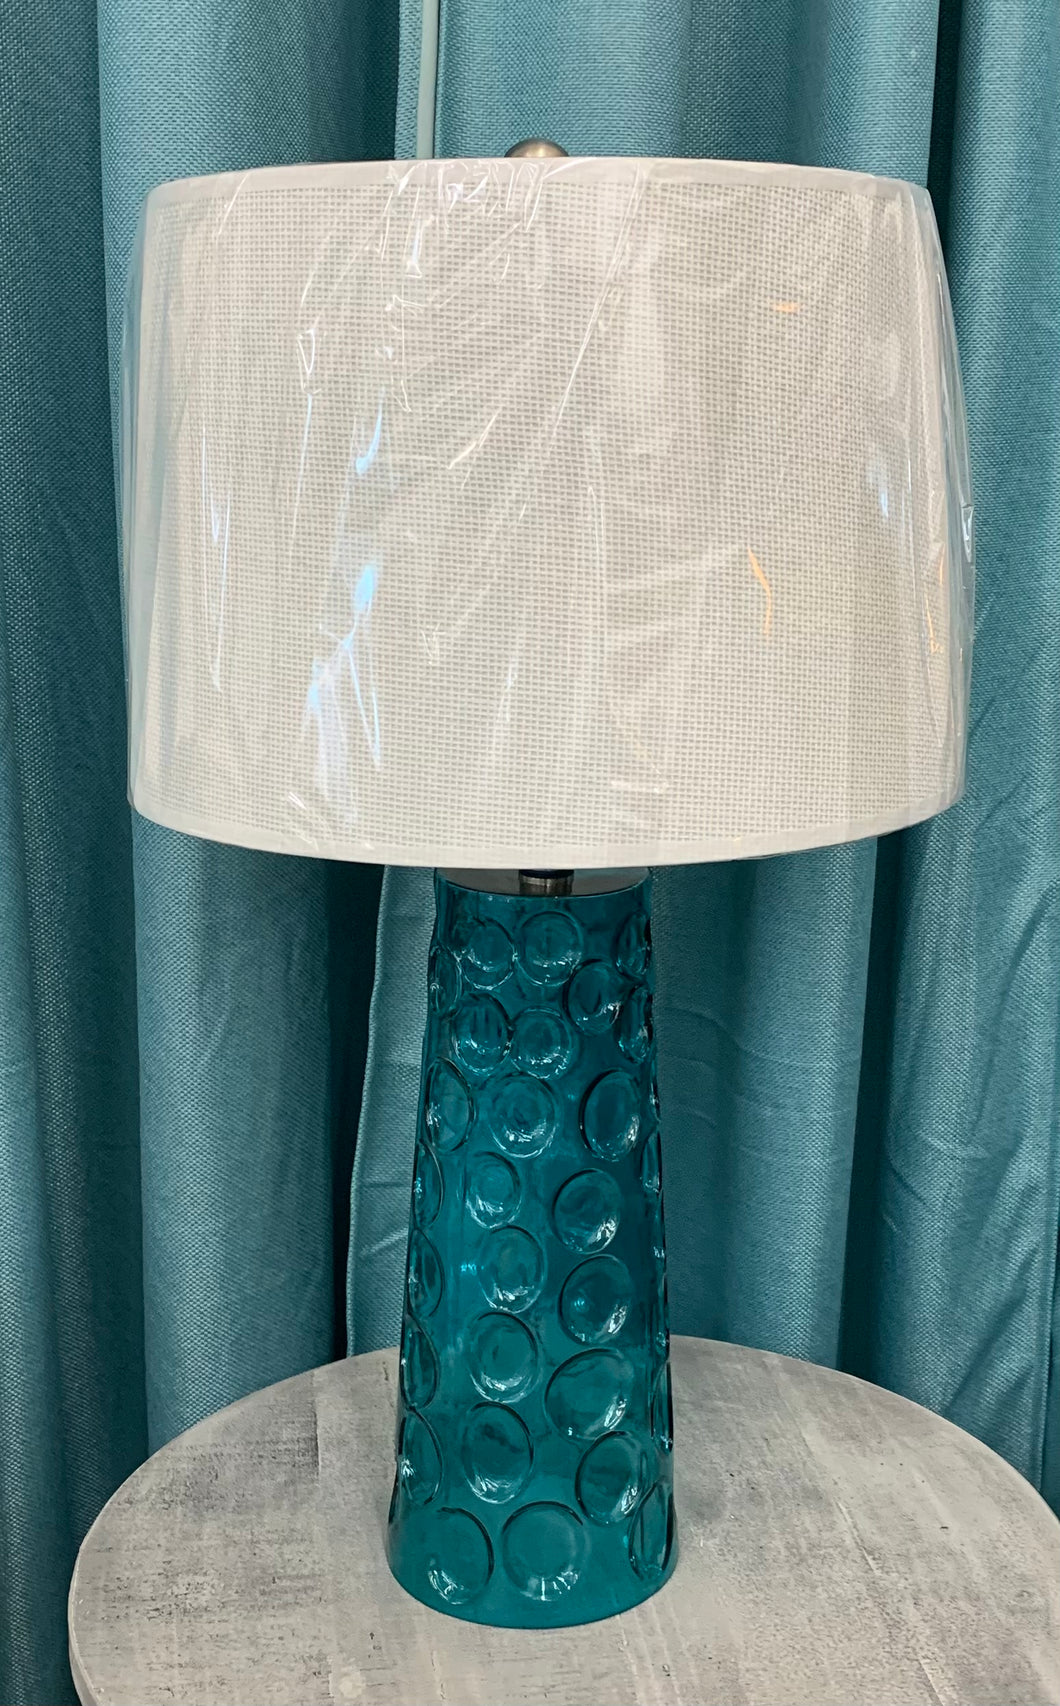 Blue Hammered Glass Table Lamp